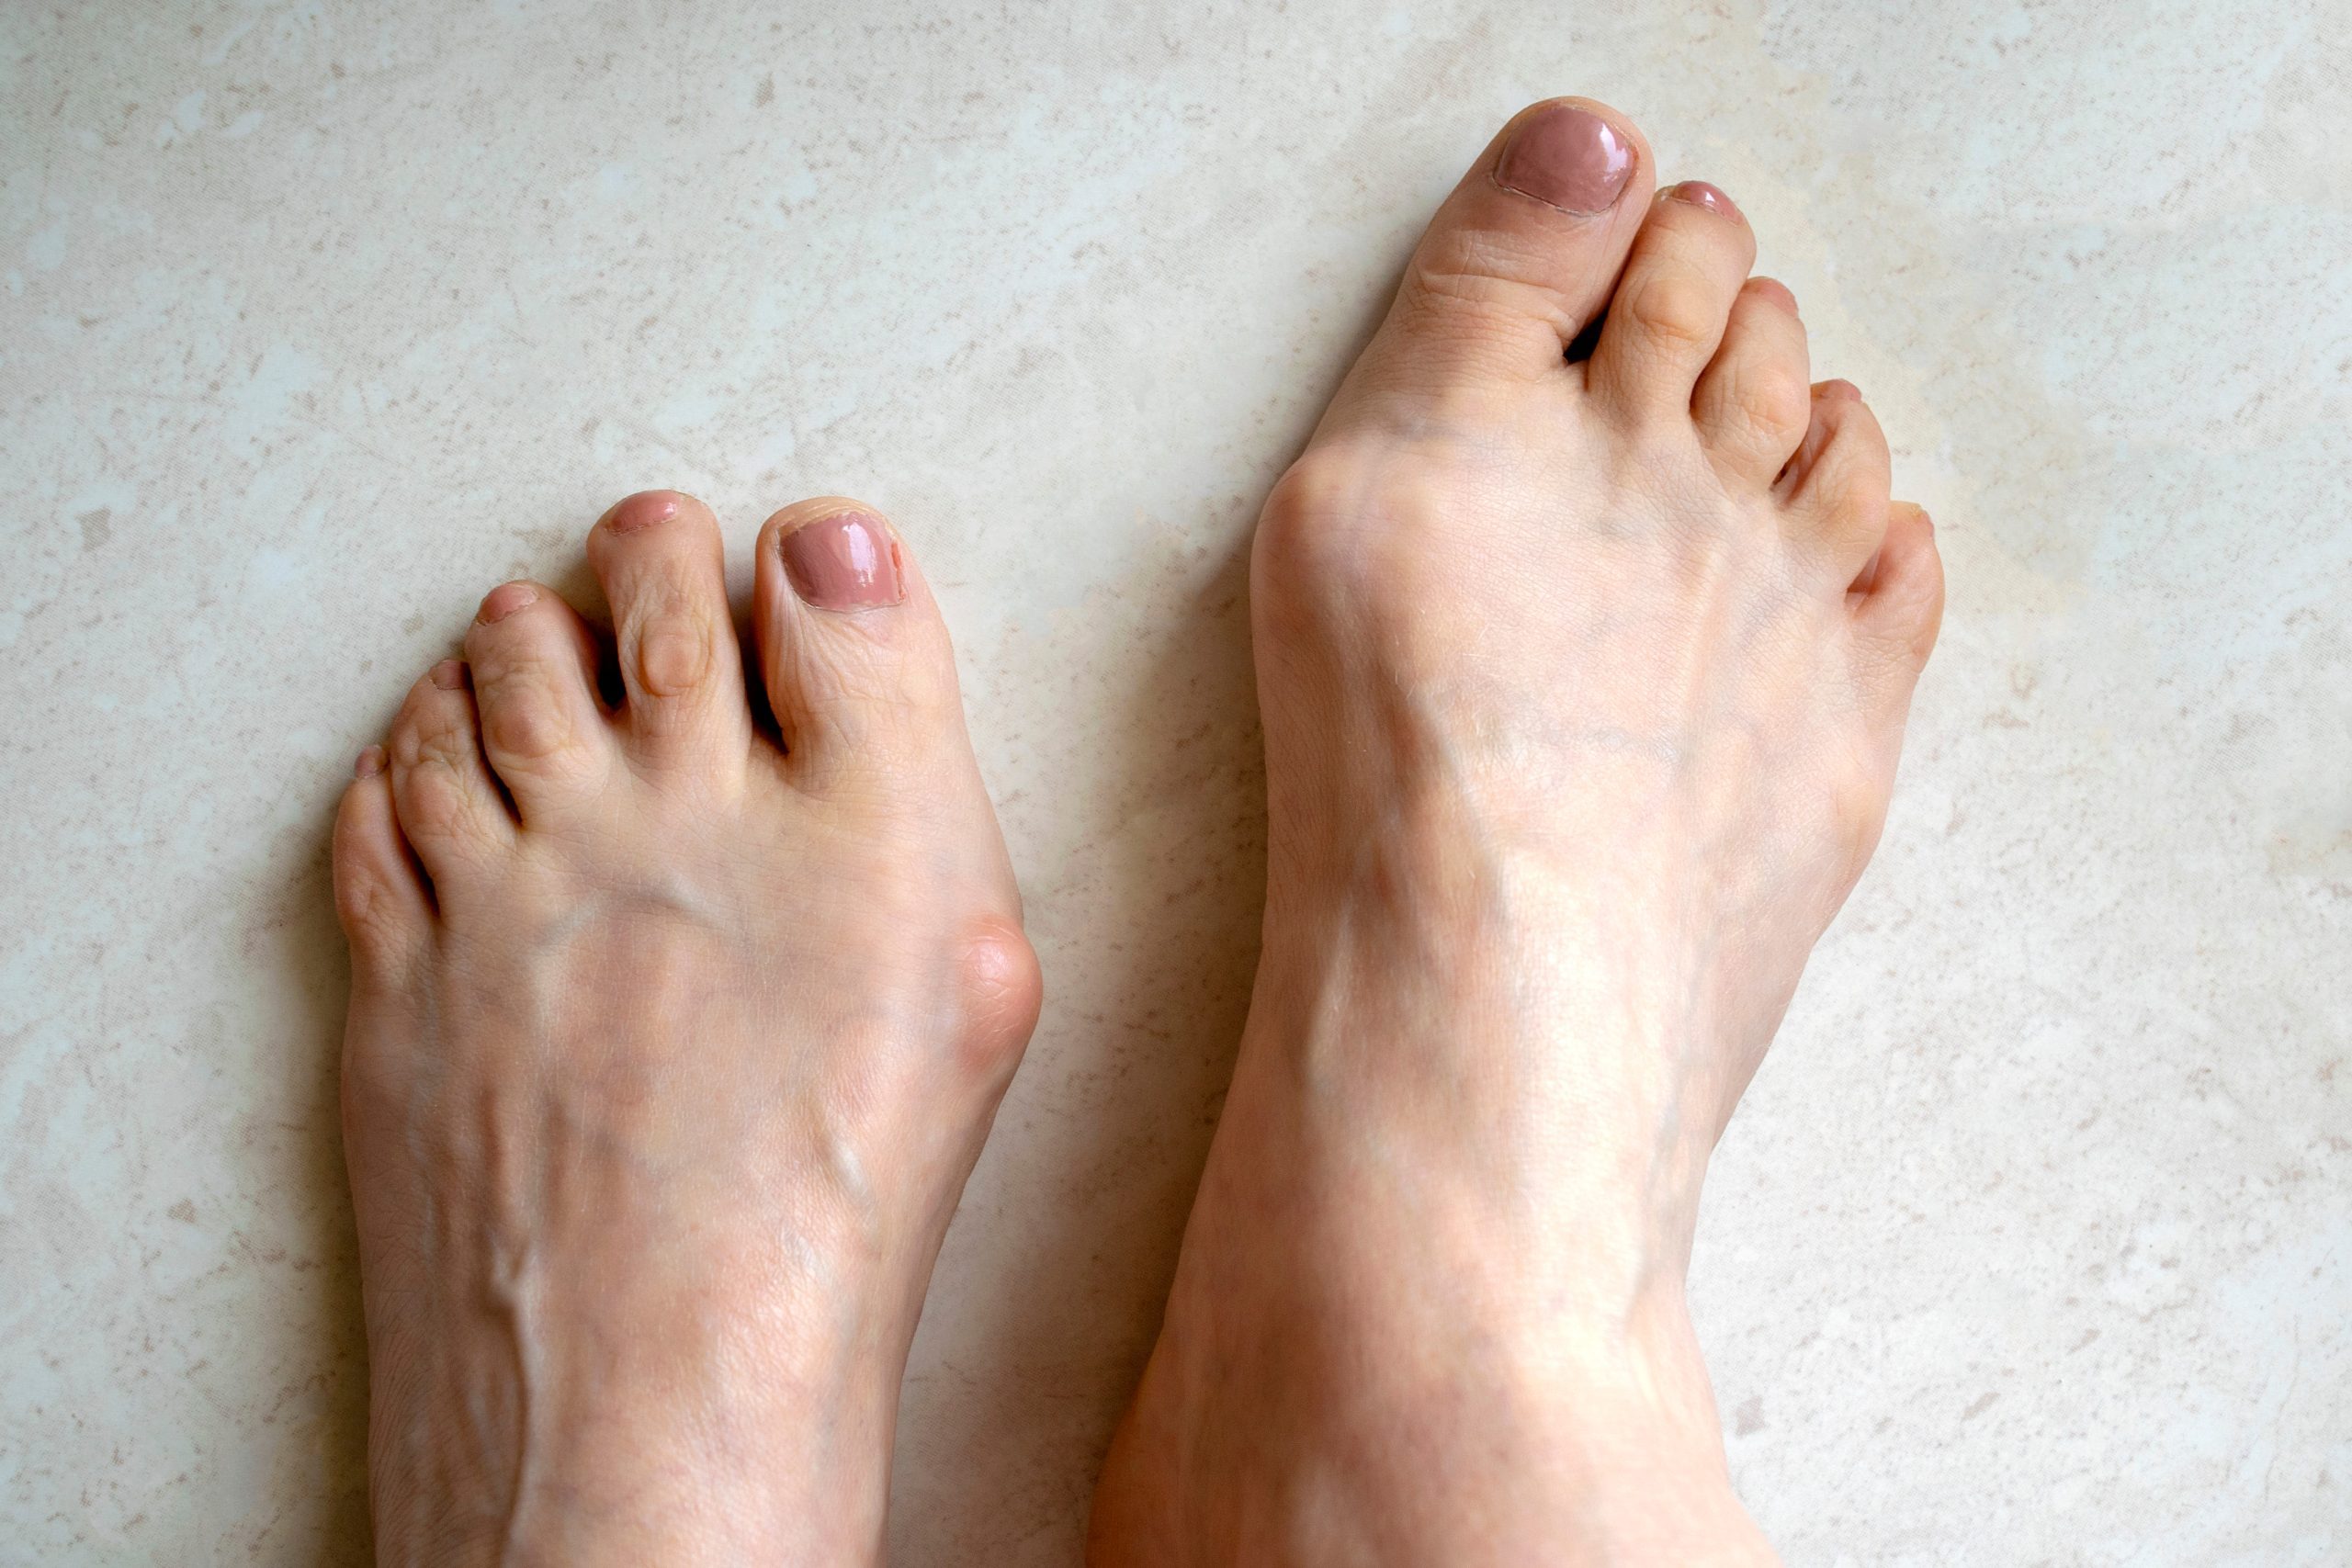 A pair of feet suffering from hallux rigidus and a visible bunion. The big toe is angled towards the other toes, indicating hallux rigidus and a large bony protrusion can be seen at the base of the big toe, indicating a bunion.